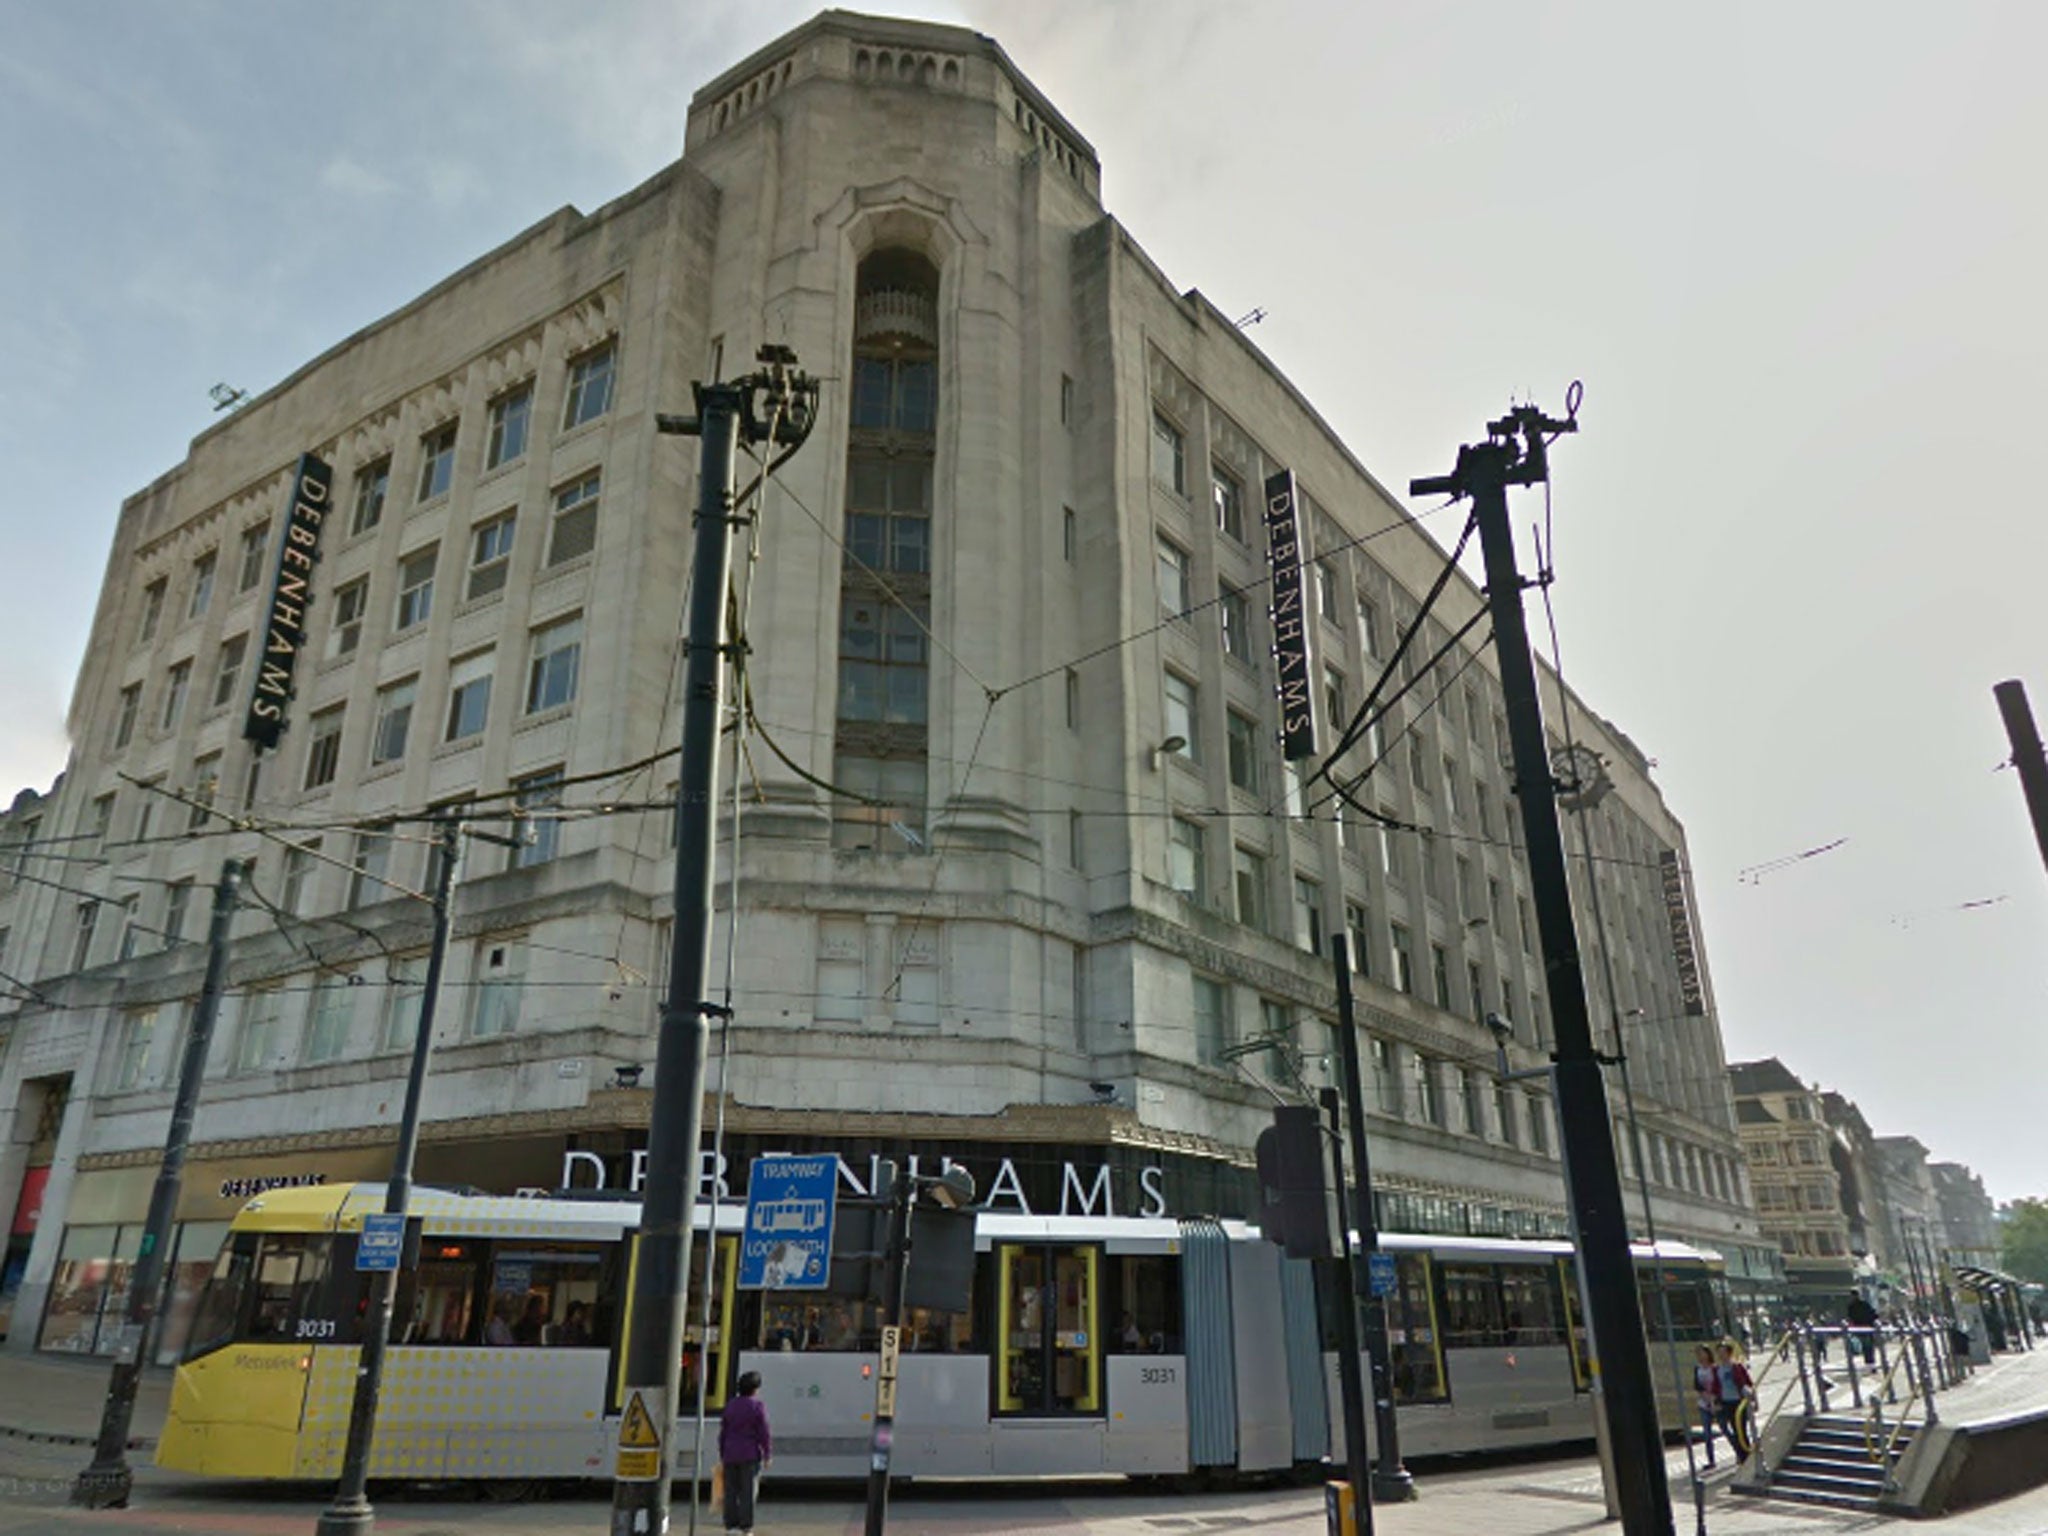 Two men have been found guilty of raping a 14-year-old boy in this Debenhams store in Manchester